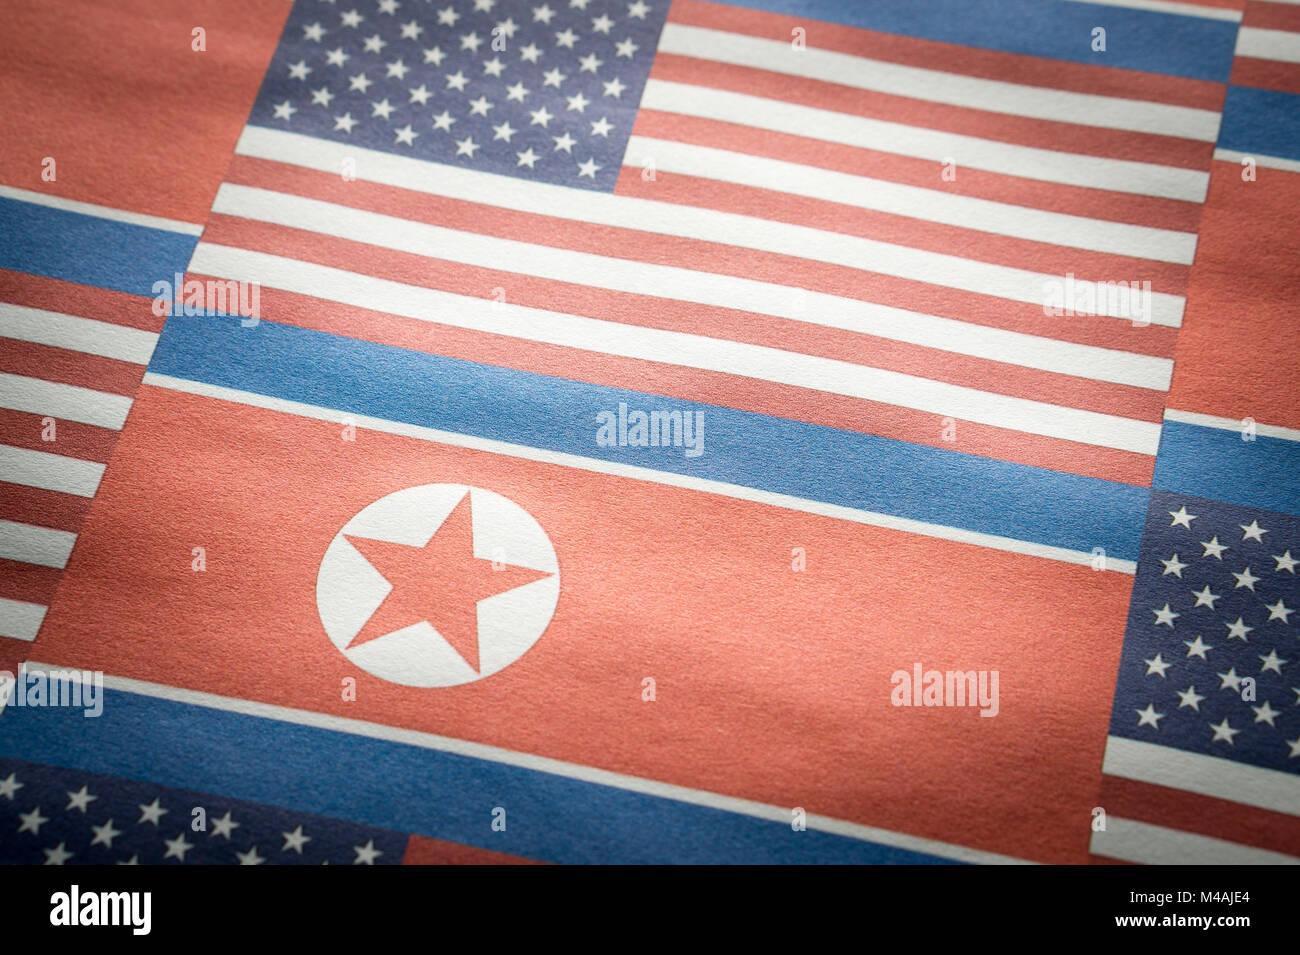 The flag of United States of America (USA) and North Korea on a wrinkled rough paper texture. Stock Photo